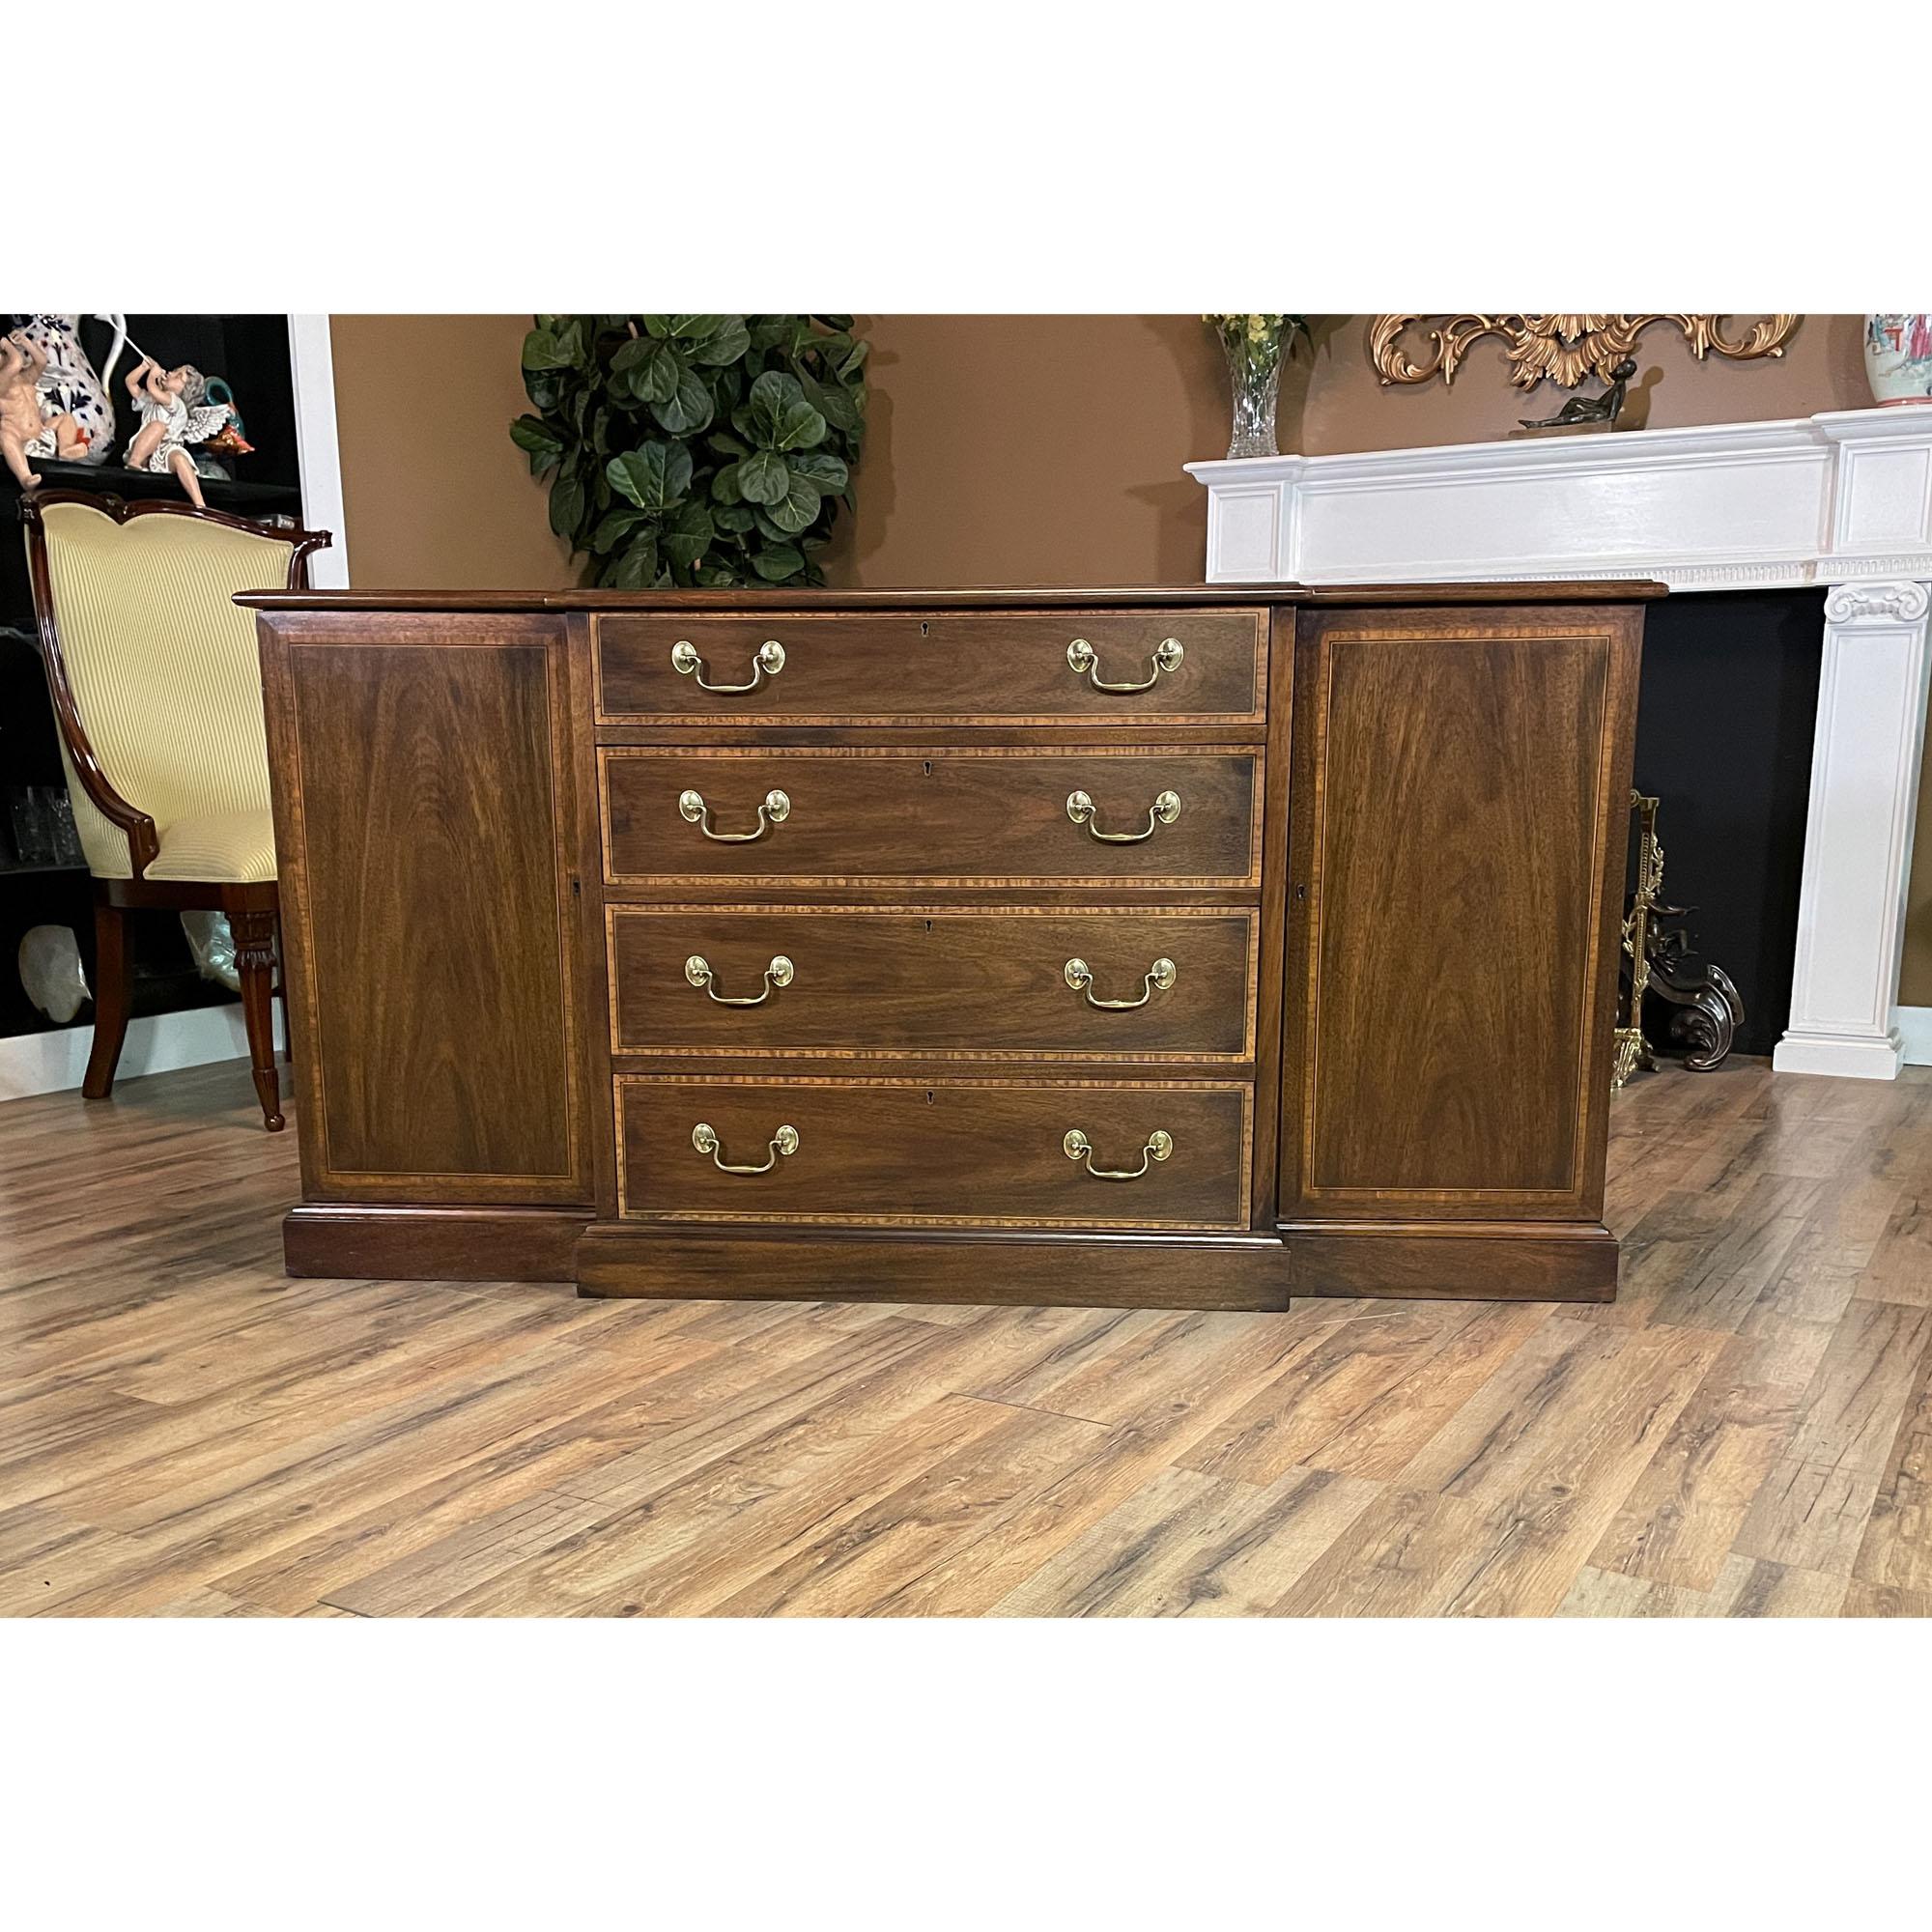 A Vintage Henkel Harris Two Piece Breakfront brought to you by Niagara Furniture. This china closet is impressive in both it’s design and scale. Made of beautifully grained solid mahogany, the bookcase top features glass shelves as well as original